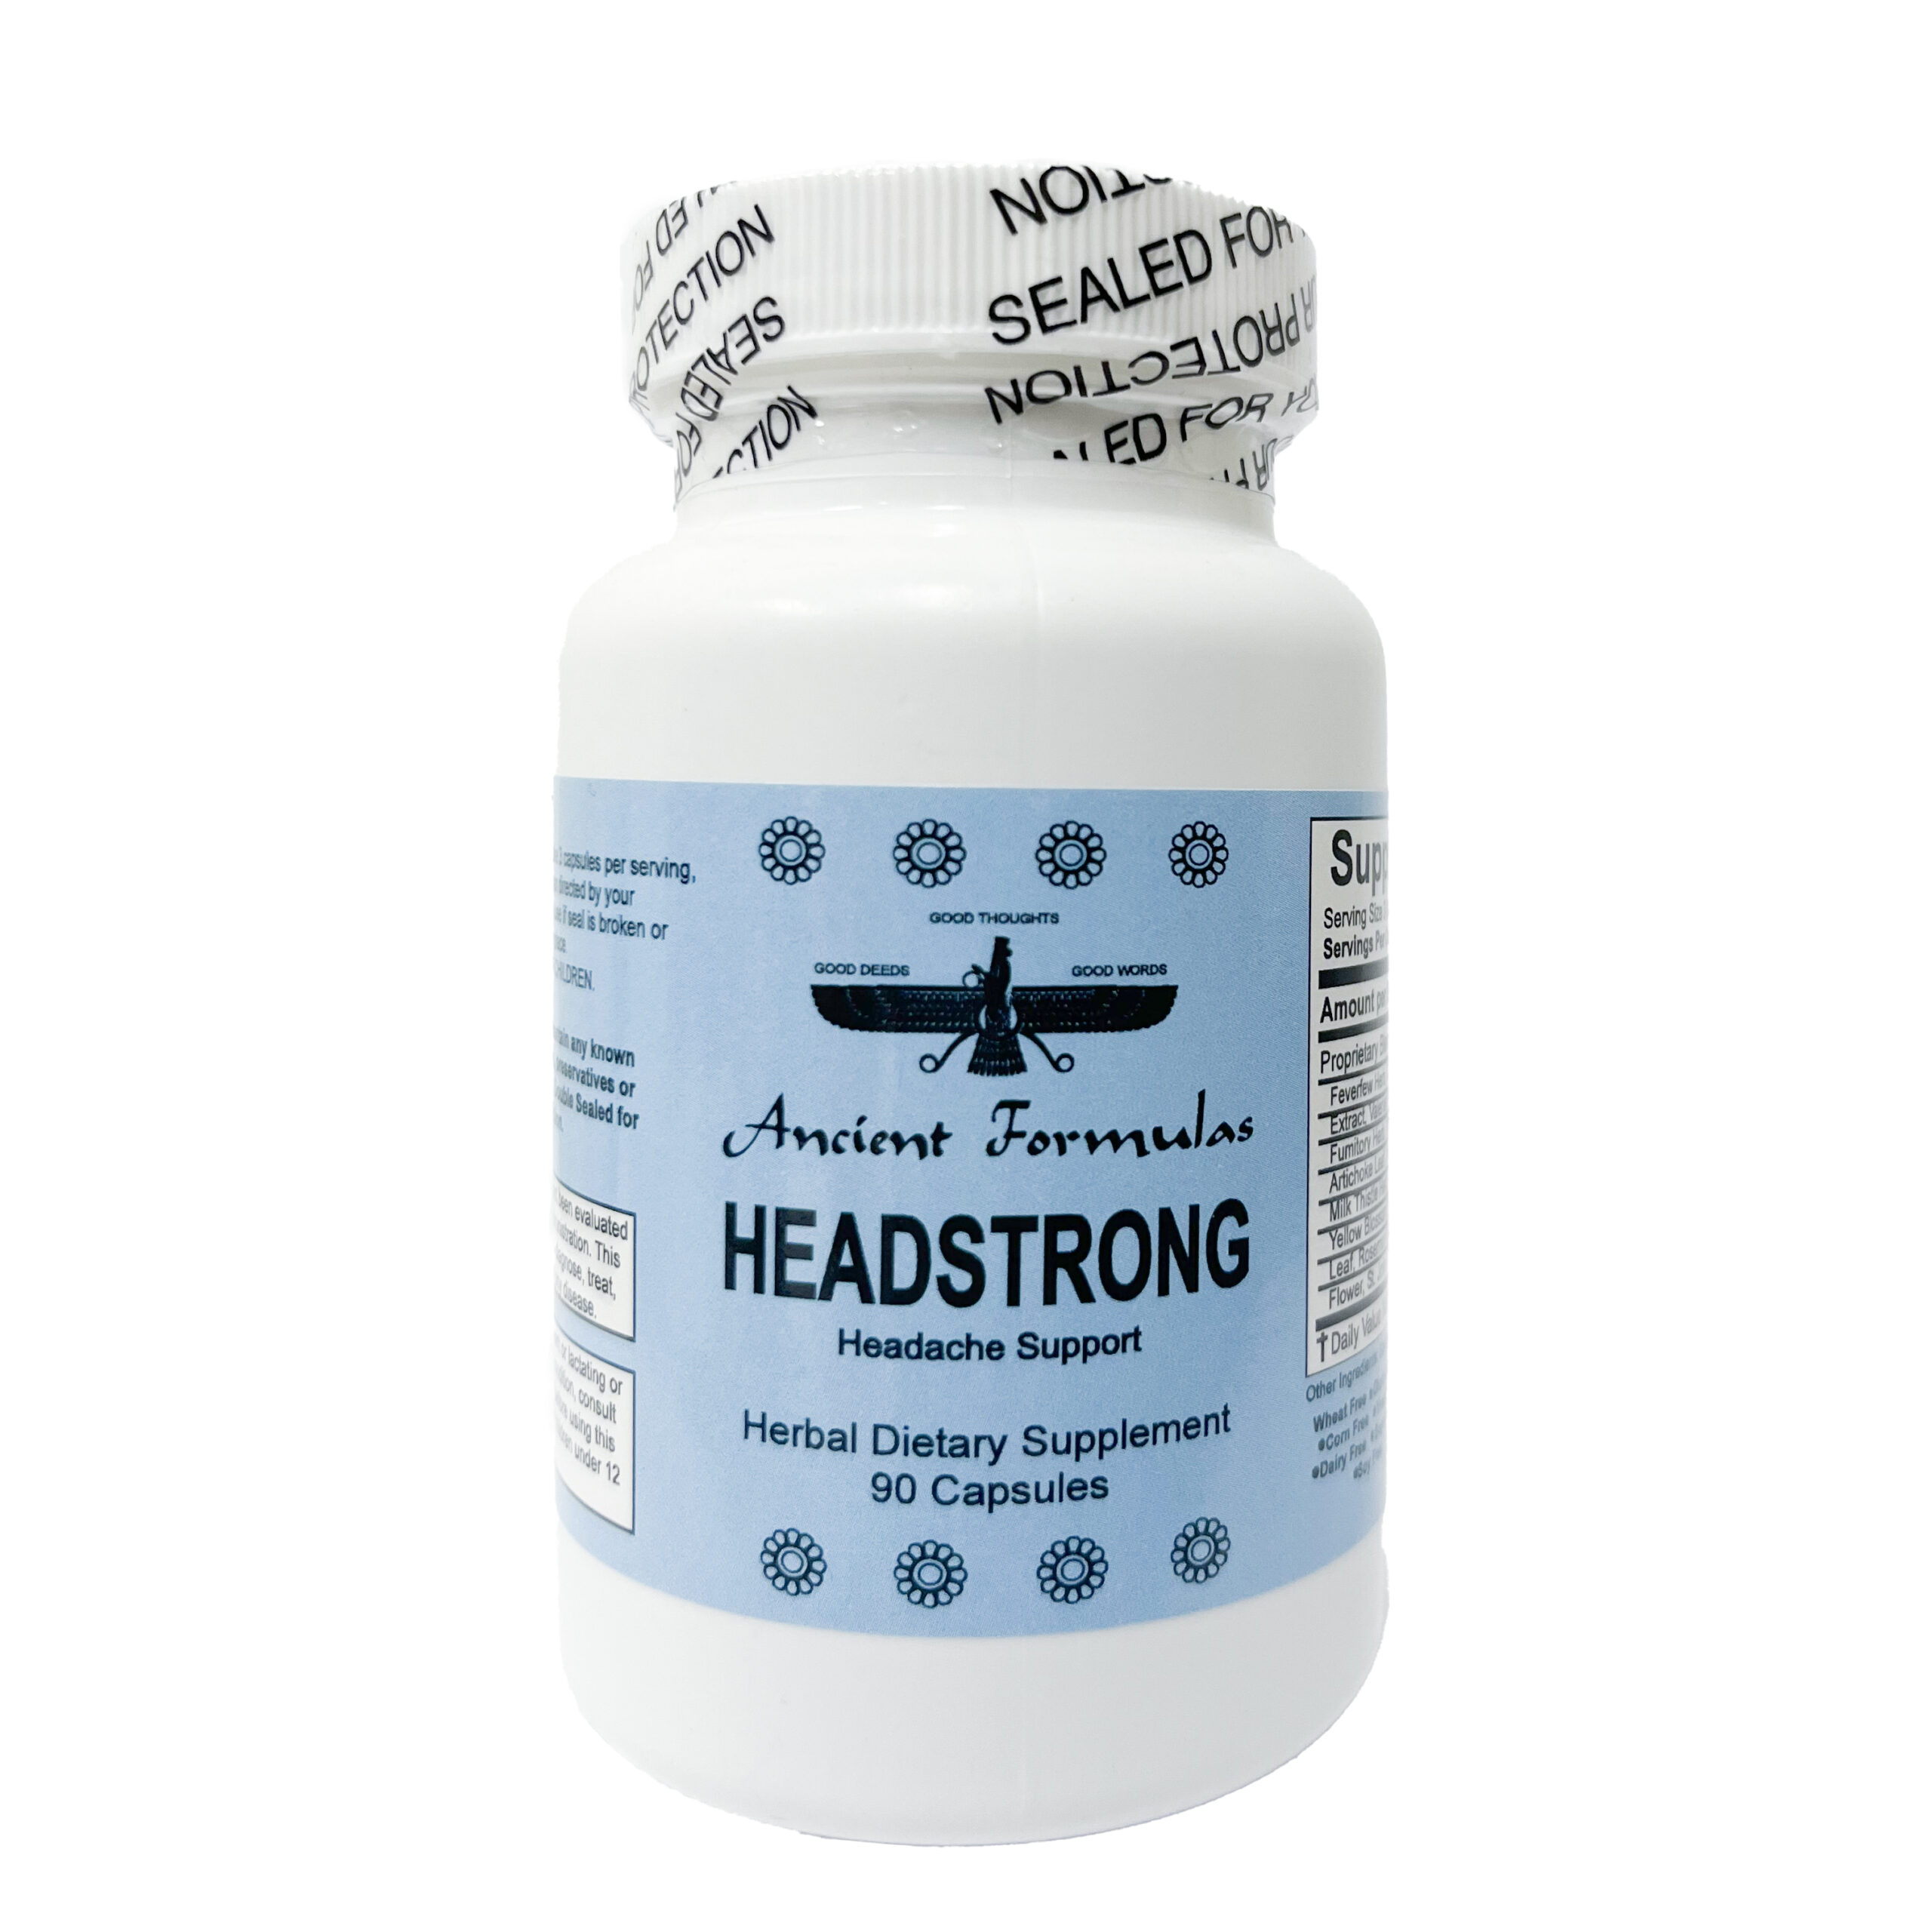 Headstrong 90 Capsules | headache support